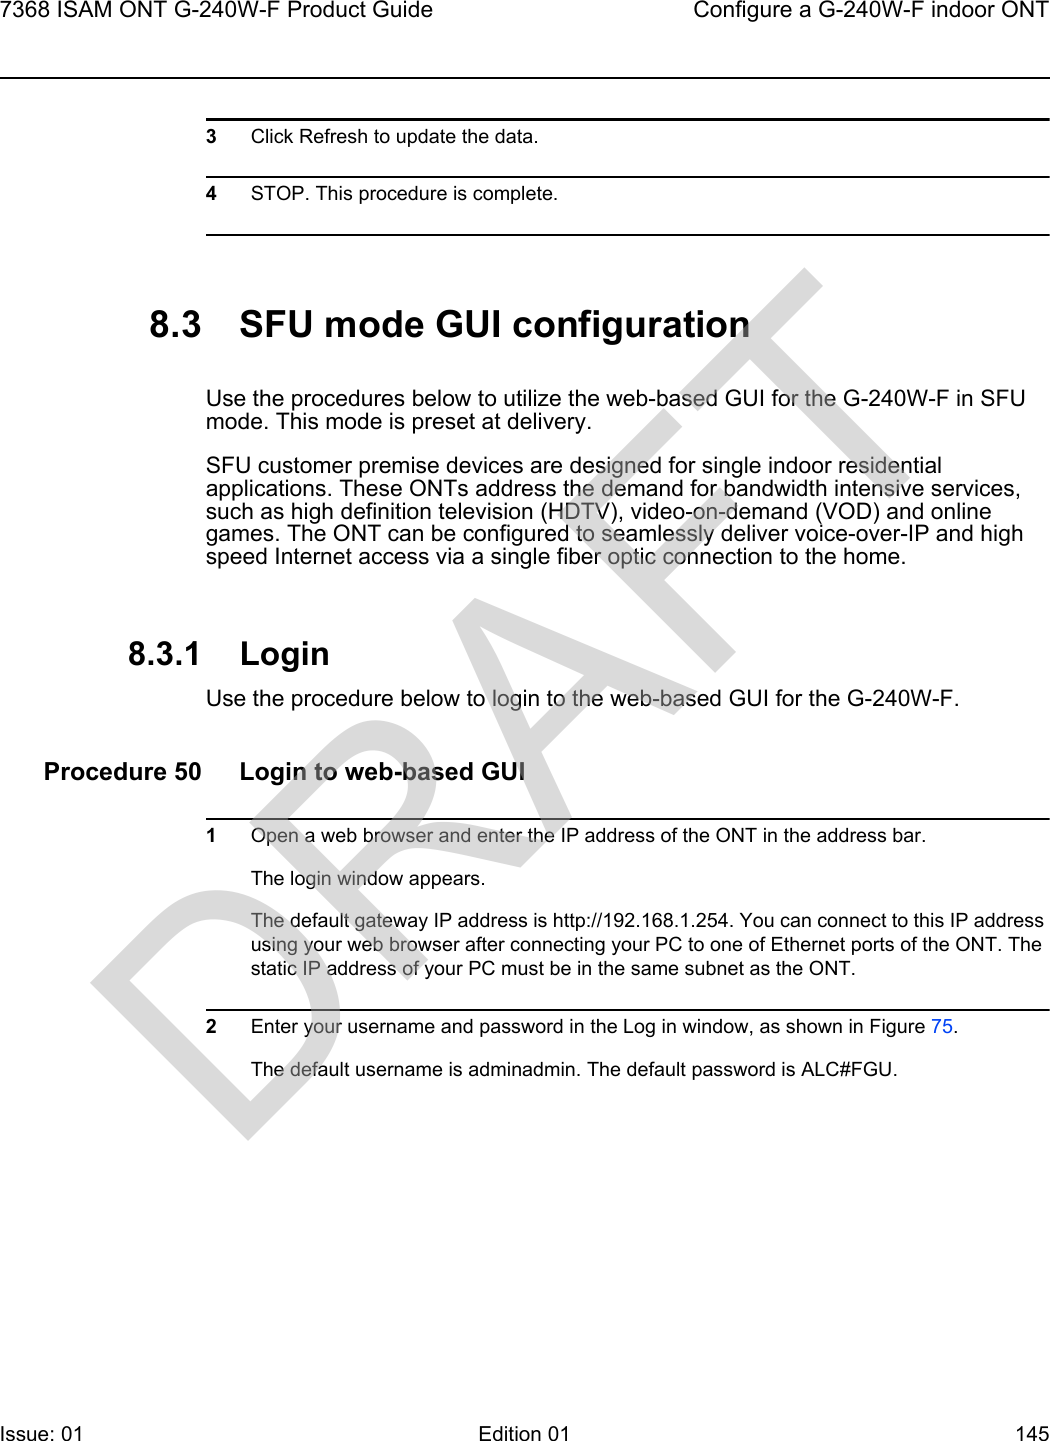 7368 ISAM ONT G-240W-F Product Guide Configure a G-240W-F indoor ONTIssue: 01 Edition 01 145 3Click Refresh to update the data. 4STOP. This procedure is complete.8.3 SFU mode GUI configurationUse the procedures below to utilize the web-based GUI for the G-240W-F in SFU mode. This mode is preset at delivery.SFU customer premise devices are designed for single indoor residential applications. These ONTs address the demand for bandwidth intensive services, such as high definition television (HDTV), video-on-demand (VOD) and online games. The ONT can be configured to seamlessly deliver voice-over-IP and high speed Internet access via a single fiber optic connection to the home.8.3.1 LoginUse the procedure below to login to the web-based GUI for the G-240W-F.Procedure 50 Login to web-based GUI1Open a web browser and enter the IP address of the ONT in the address bar.The login window appears. The default gateway IP address is http://192.168.1.254. You can connect to this IP address using your web browser after connecting your PC to one of Ethernet ports of the ONT. The static IP address of your PC must be in the same subnet as the ONT.2Enter your username and password in the Log in window, as shown in Figure 75.The default username is adminadmin. The default password is ALC#FGU.DRAFT